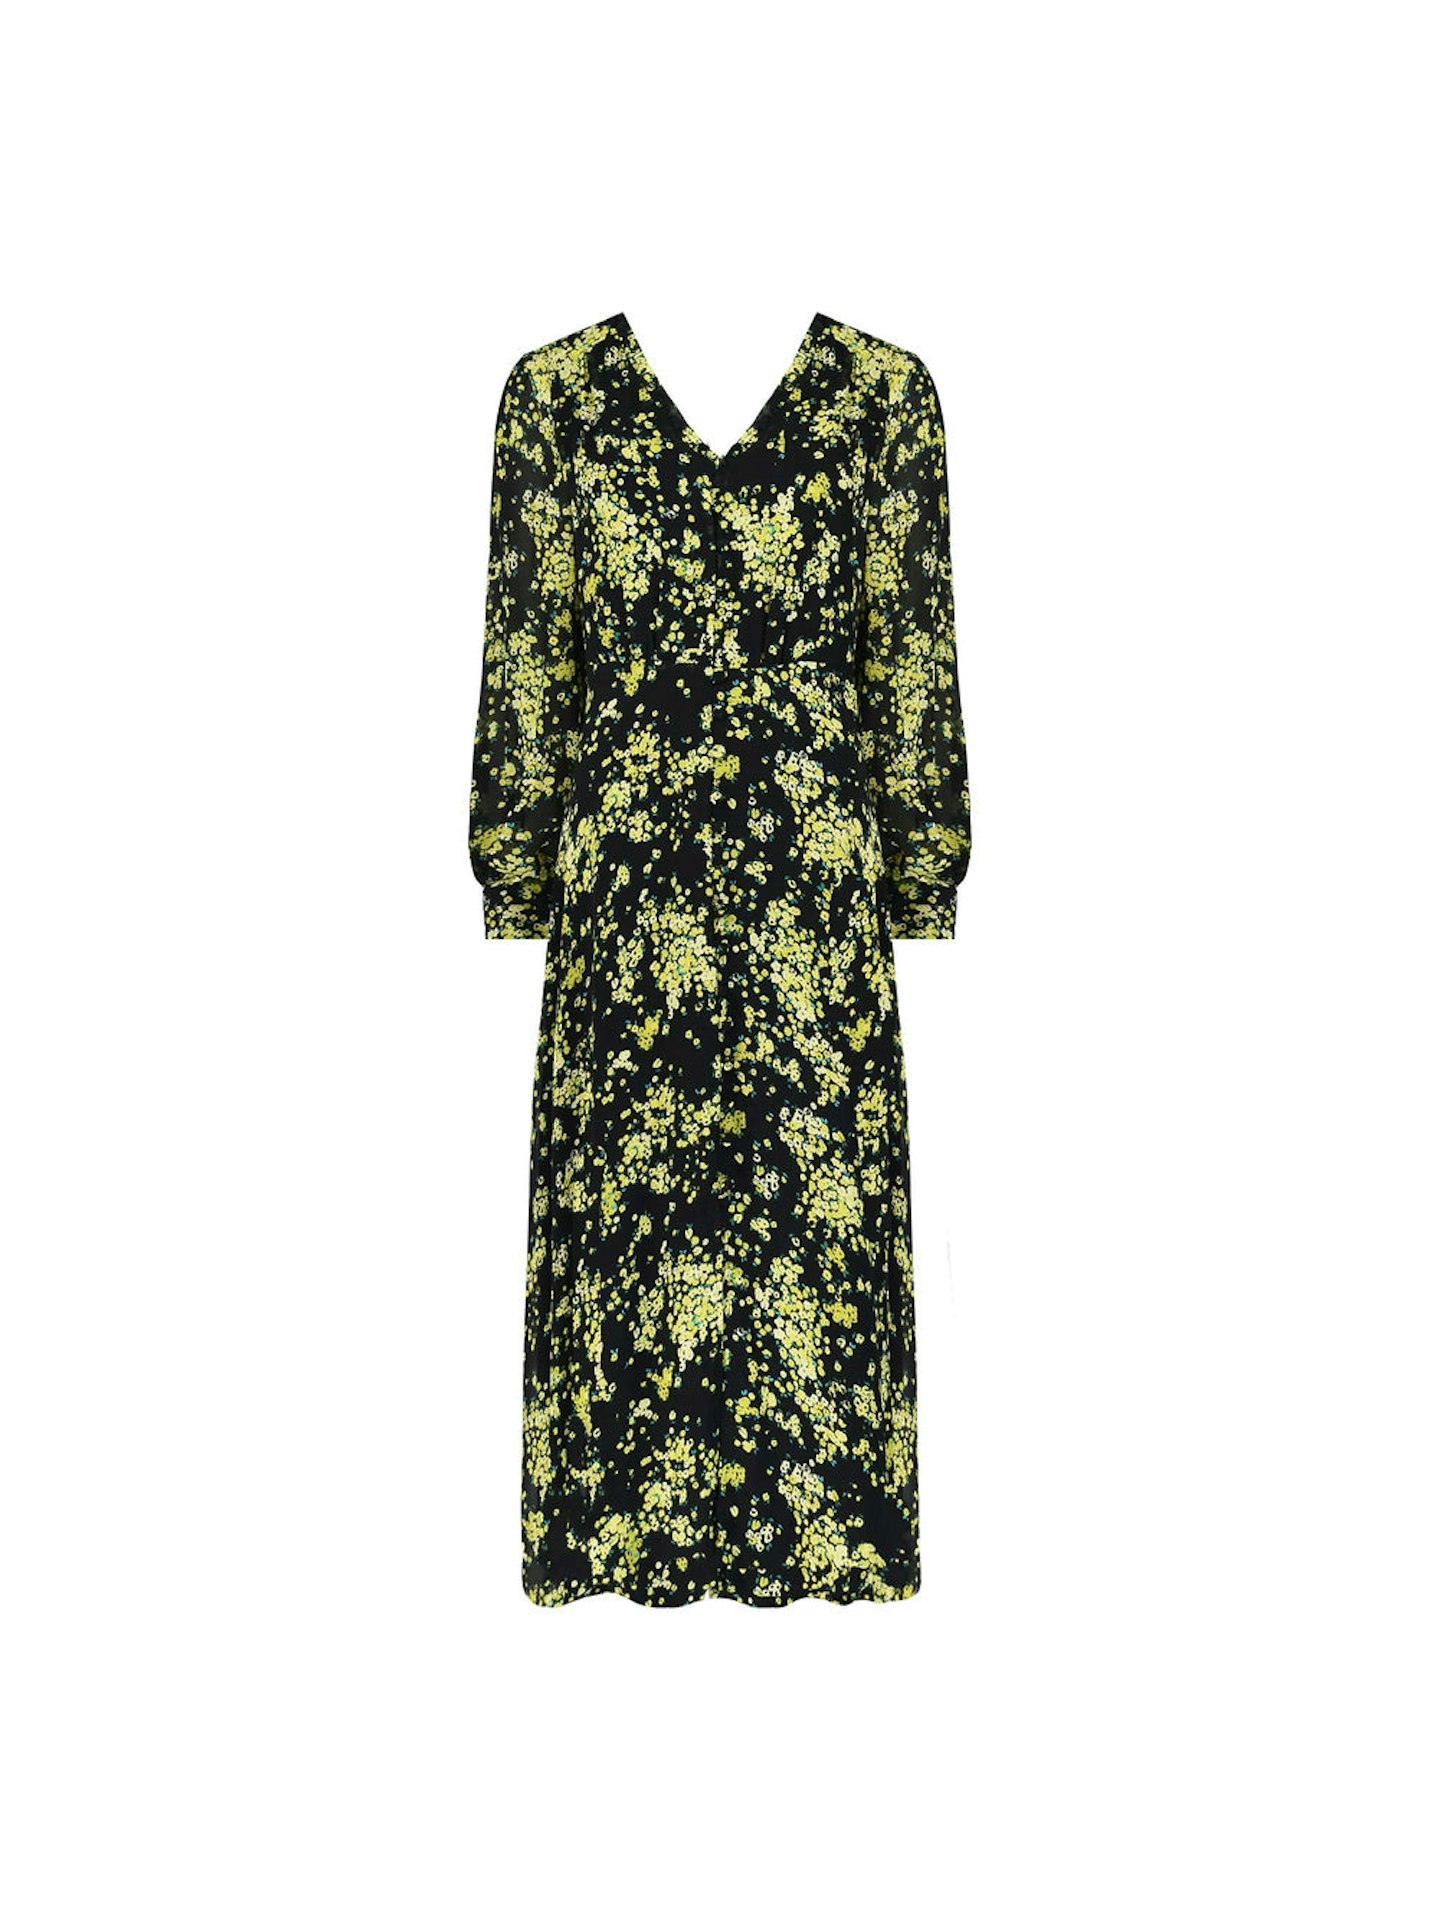 Ro&Zo, Yellow Floral Button Front Dress